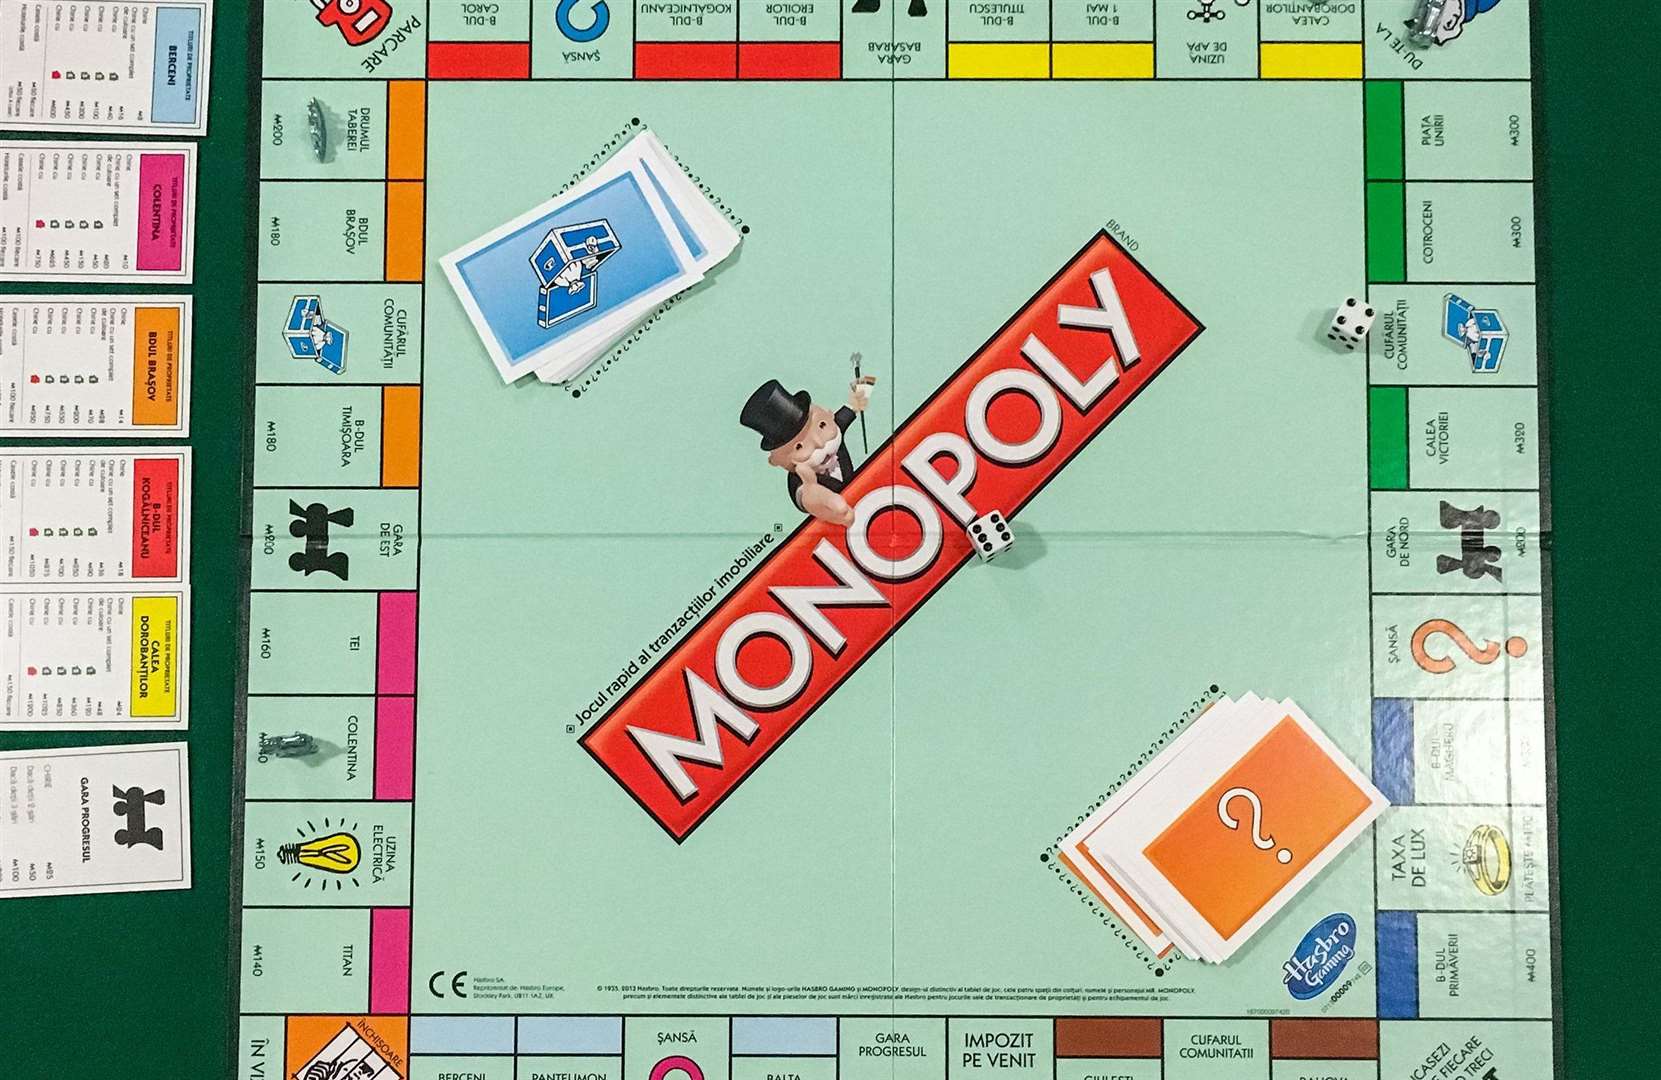 Folkestone is getting its own version of Monopoly